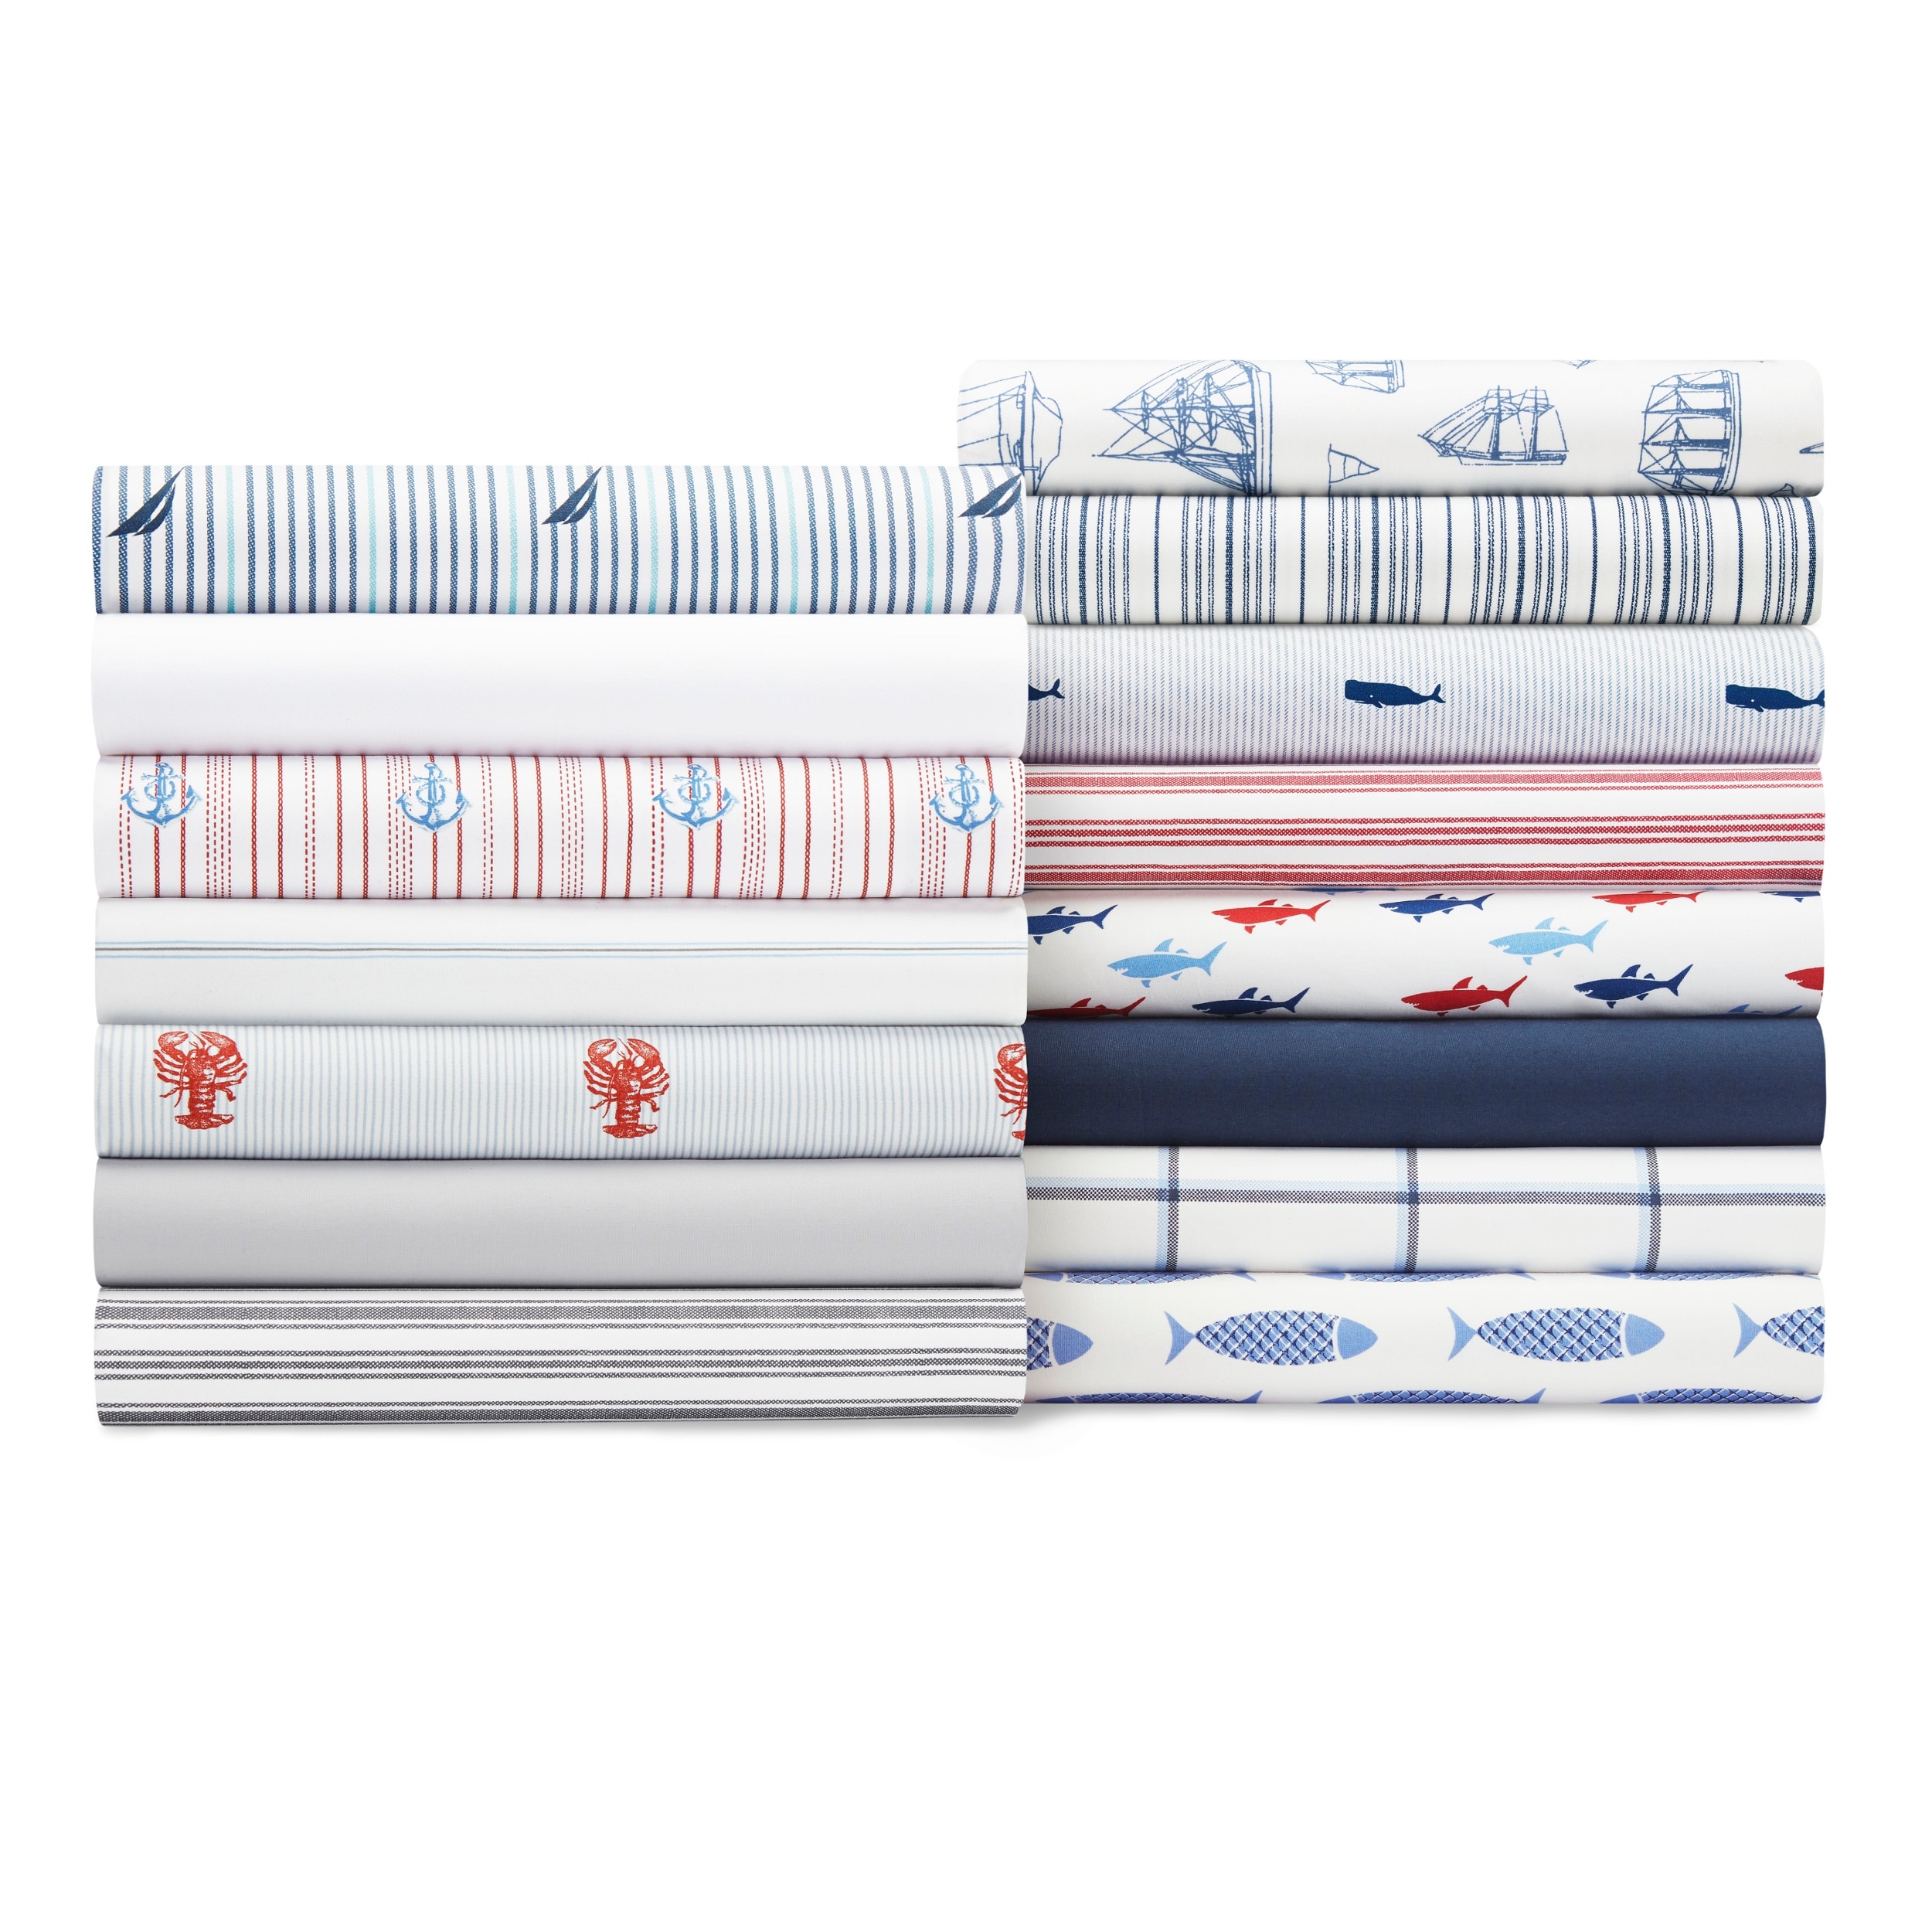 https://ak1.ostkcdn.com/images/products/is/images/direct/61db02fc43970927e86e5b1048448213023aae25/Nautica-Cotton-Percale-Deep-Pocket-Sheet-Sets.jpg